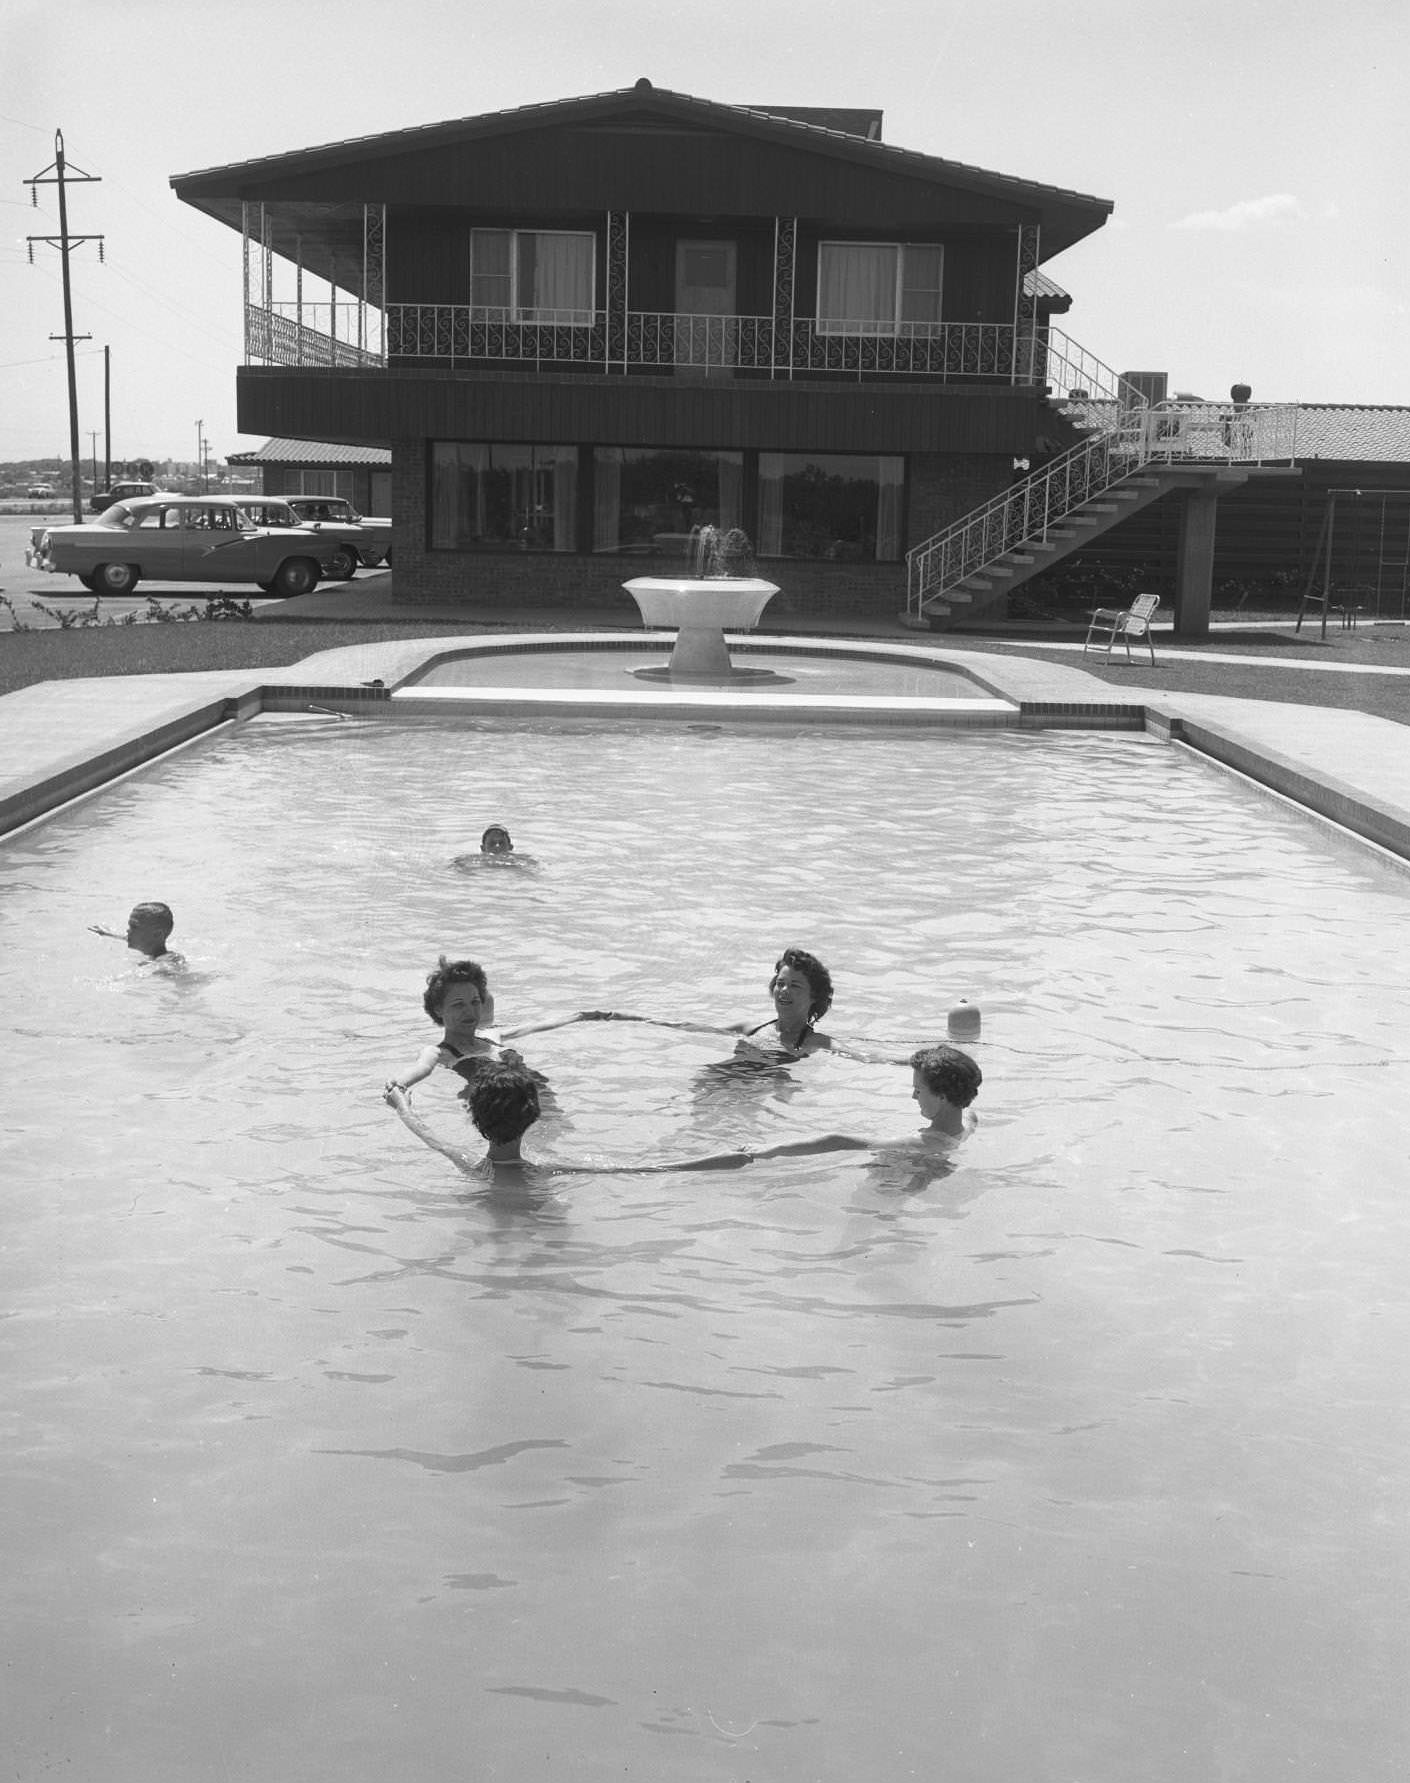 A group of people in the Thunderbird Lodge Hotel swimming pool, 1950s